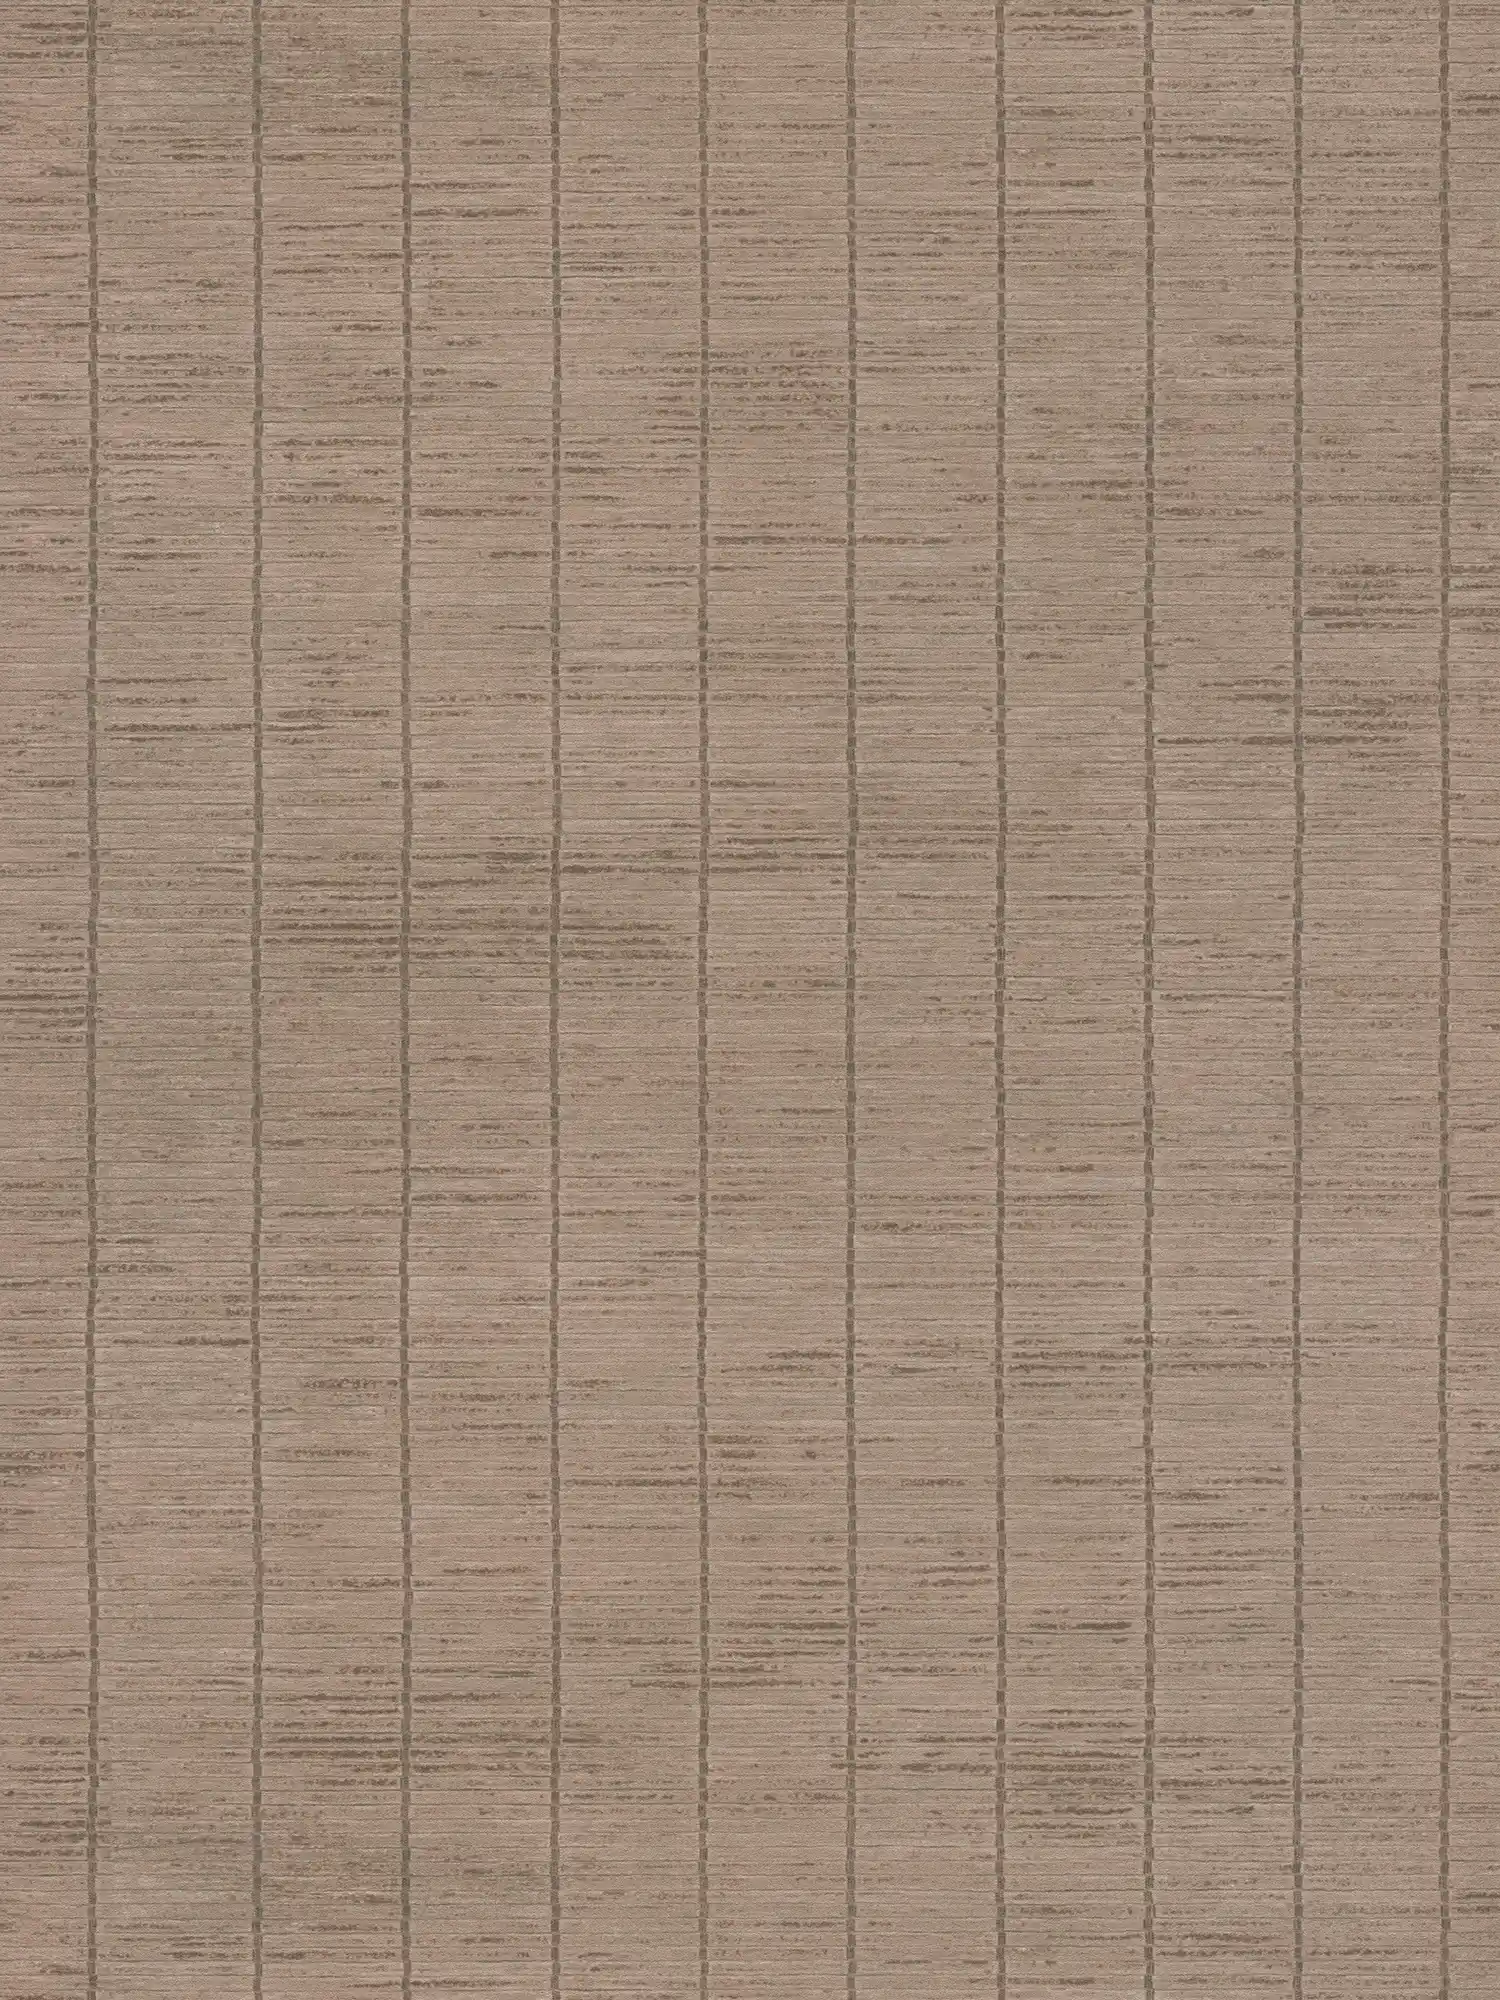         Non-woven wallpaper in Asian style with bamboo wall optic - brown
    